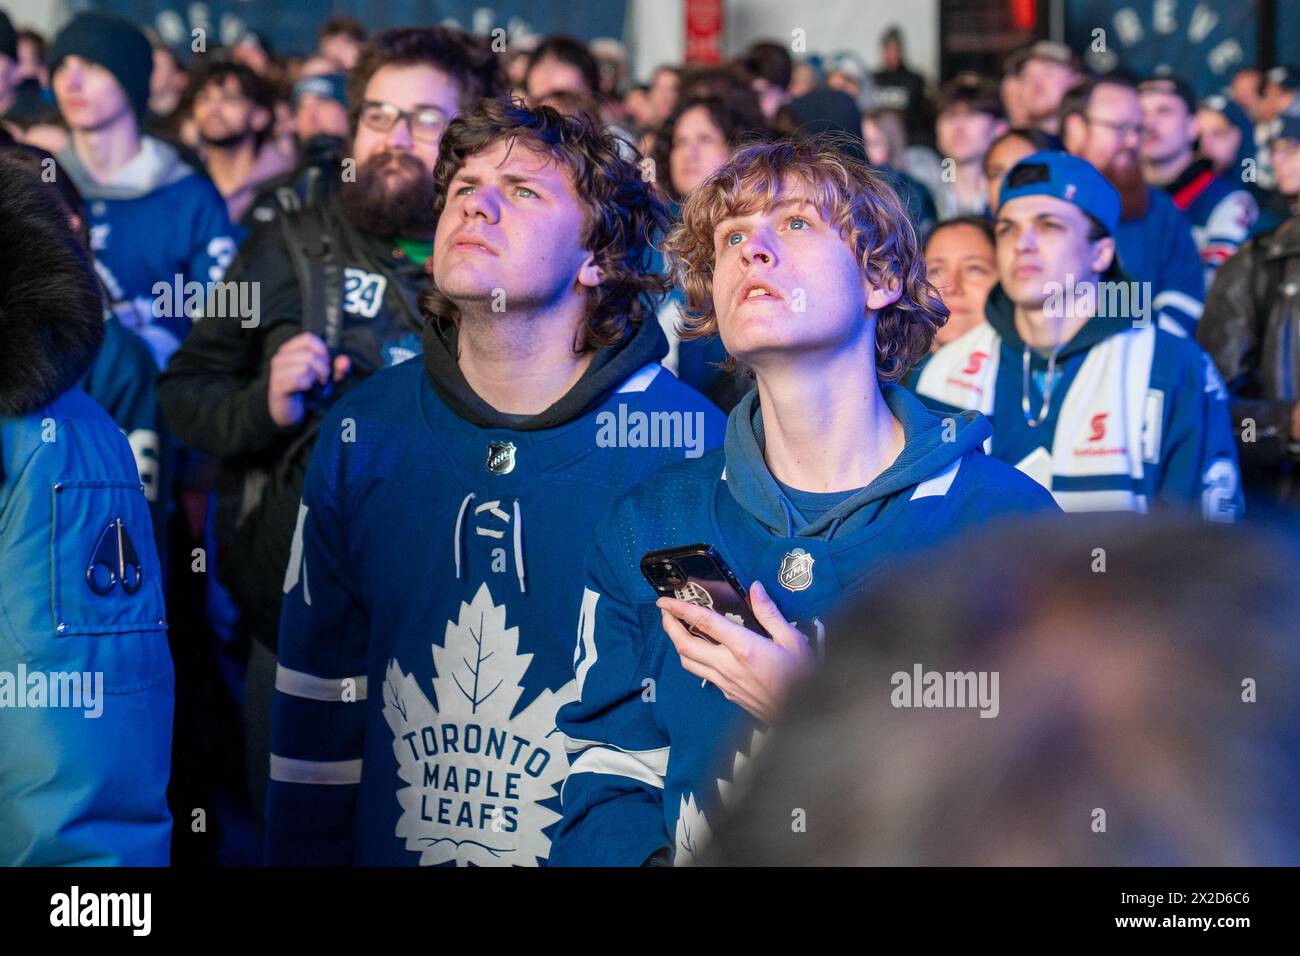 Fans watching the game on a giant screen react as the Boston Bruins score a goal against the Toronto Maple Leafs at Maple Leaf Square outside Scotiabank Arena. During Toronto Maple Leafs playoff games, Maple Leaf Square transforms into a sea of blue and white, echoing with the chants of passionate fans eagerly rallying behind their team's quest for victory. The electric atmosphere radiates anticipation and excitement, creating unforgettable memories for both die-hard supporters and casual observers alike. (Photo by Shawn Goldberg/SOPA Images/Sipa USA) Stock Photo